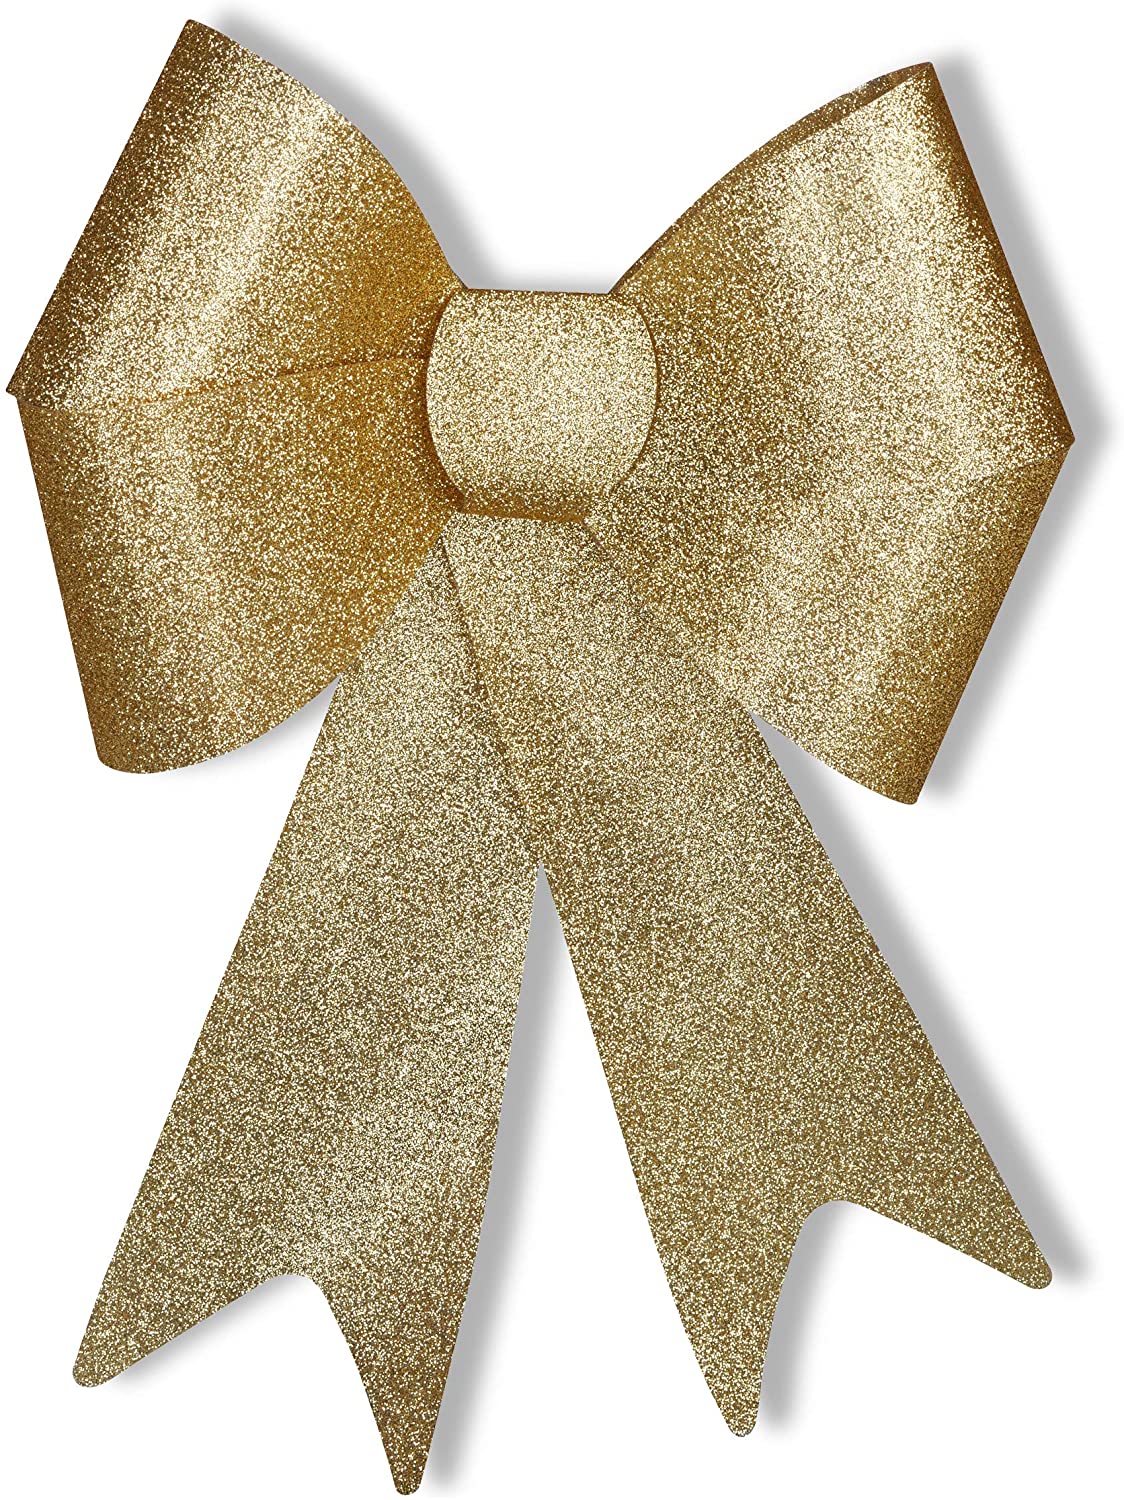 Relaxdays 3 x XL Giant Bow for Large Gifts Glitter Decoration Wedding Car Bow Gold